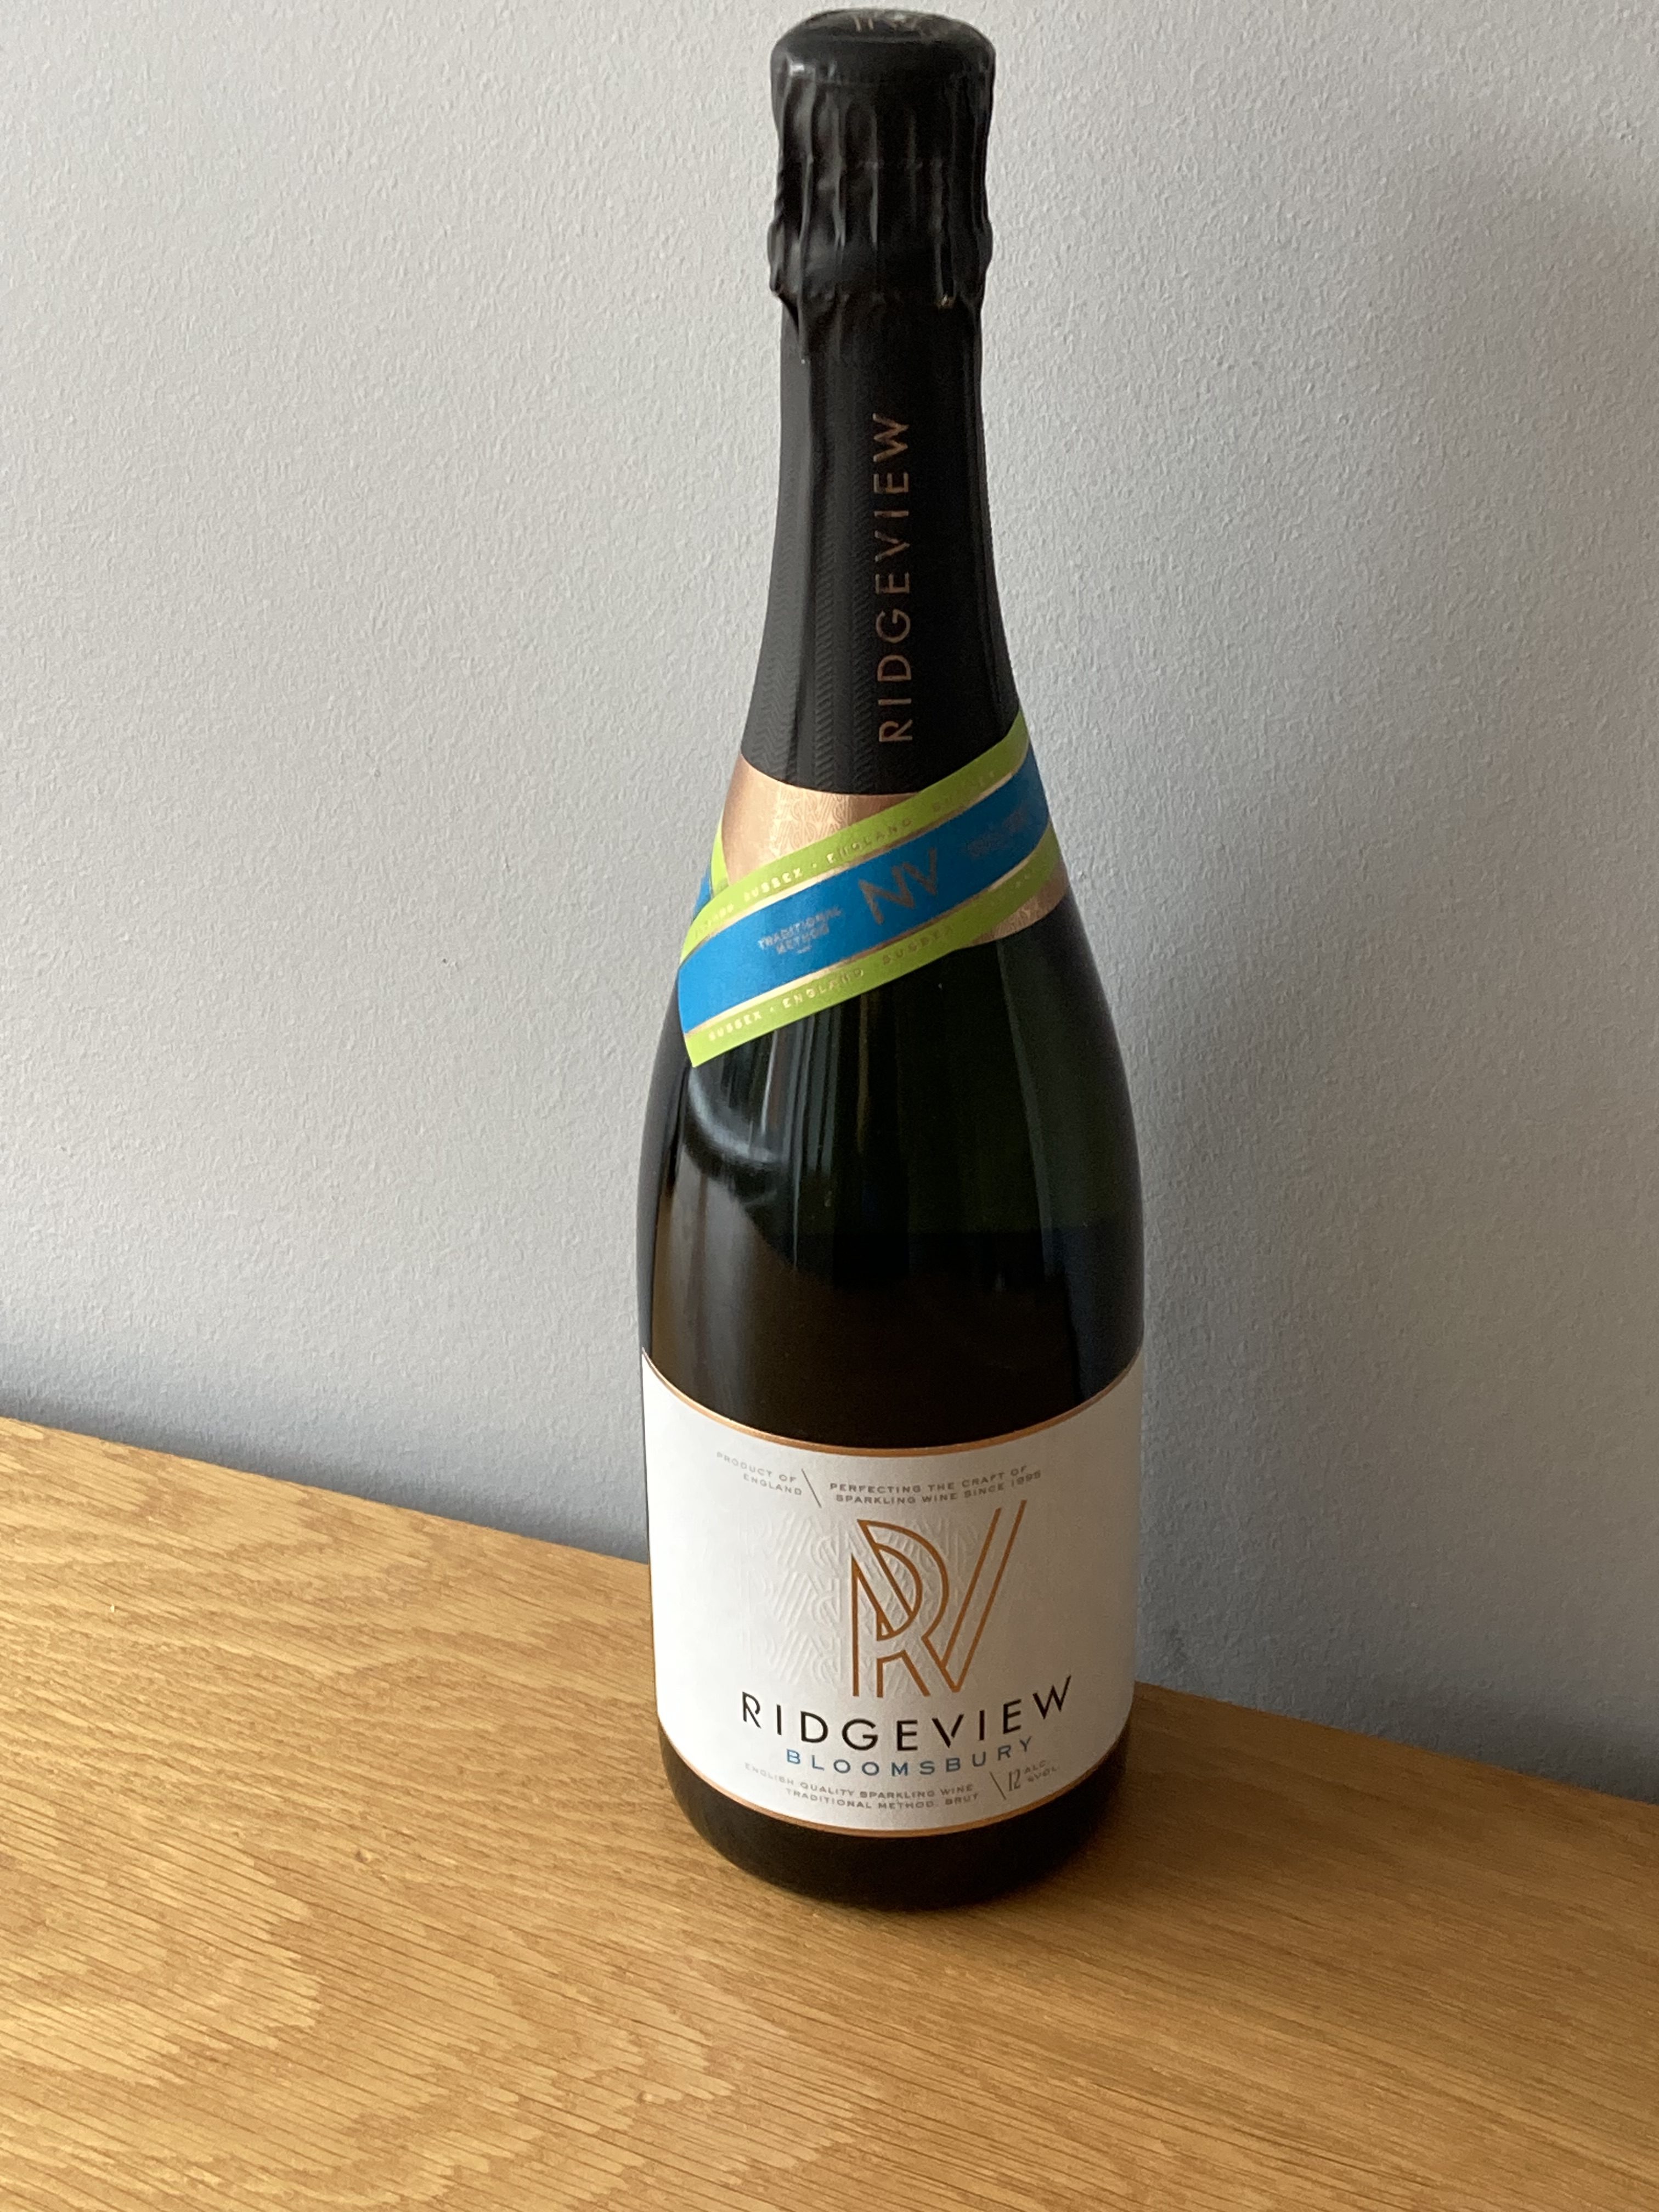 This English sparkling wine scored highly on our tests